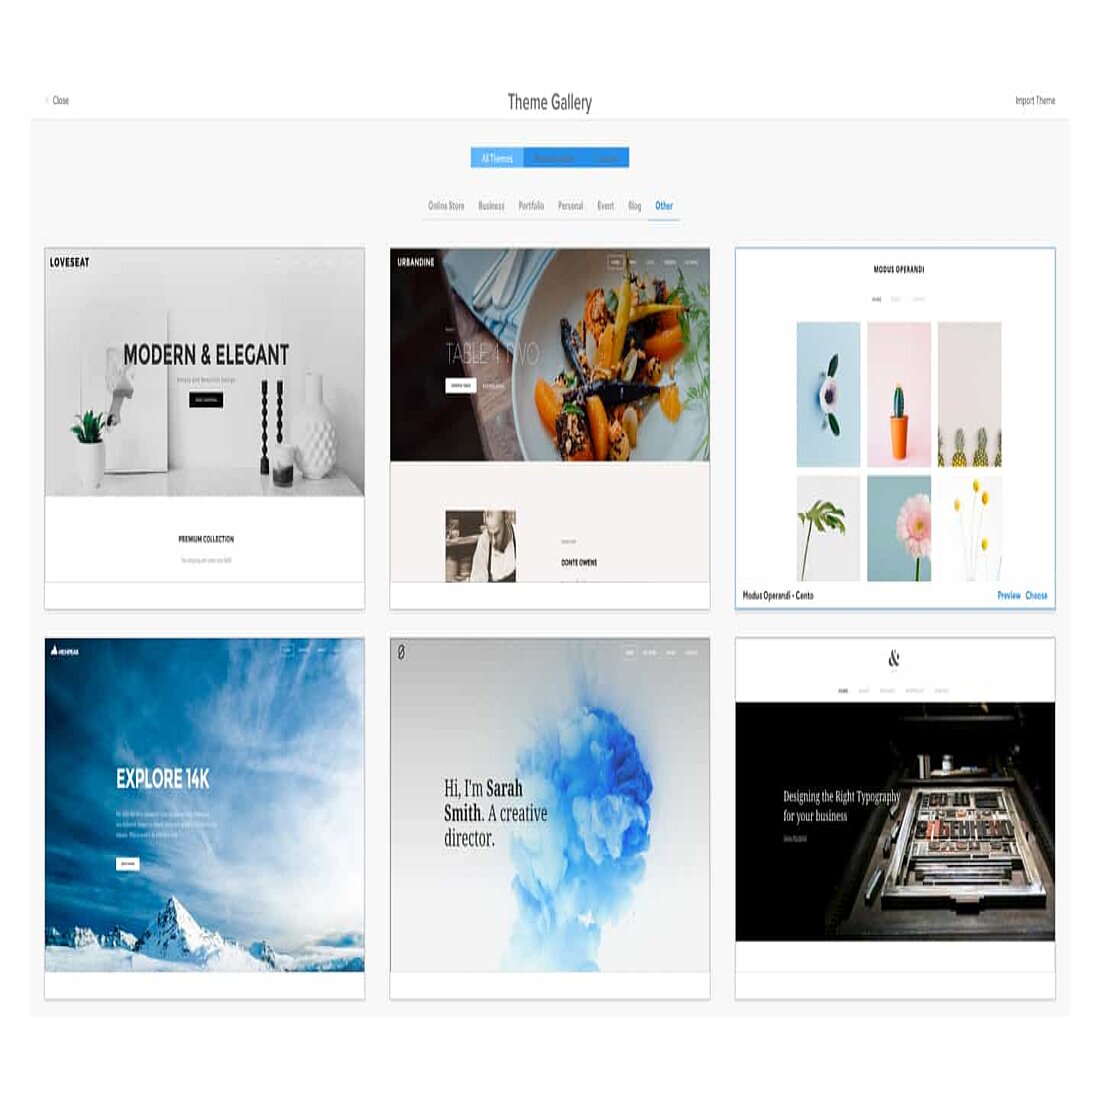 Weebly.com library of themes